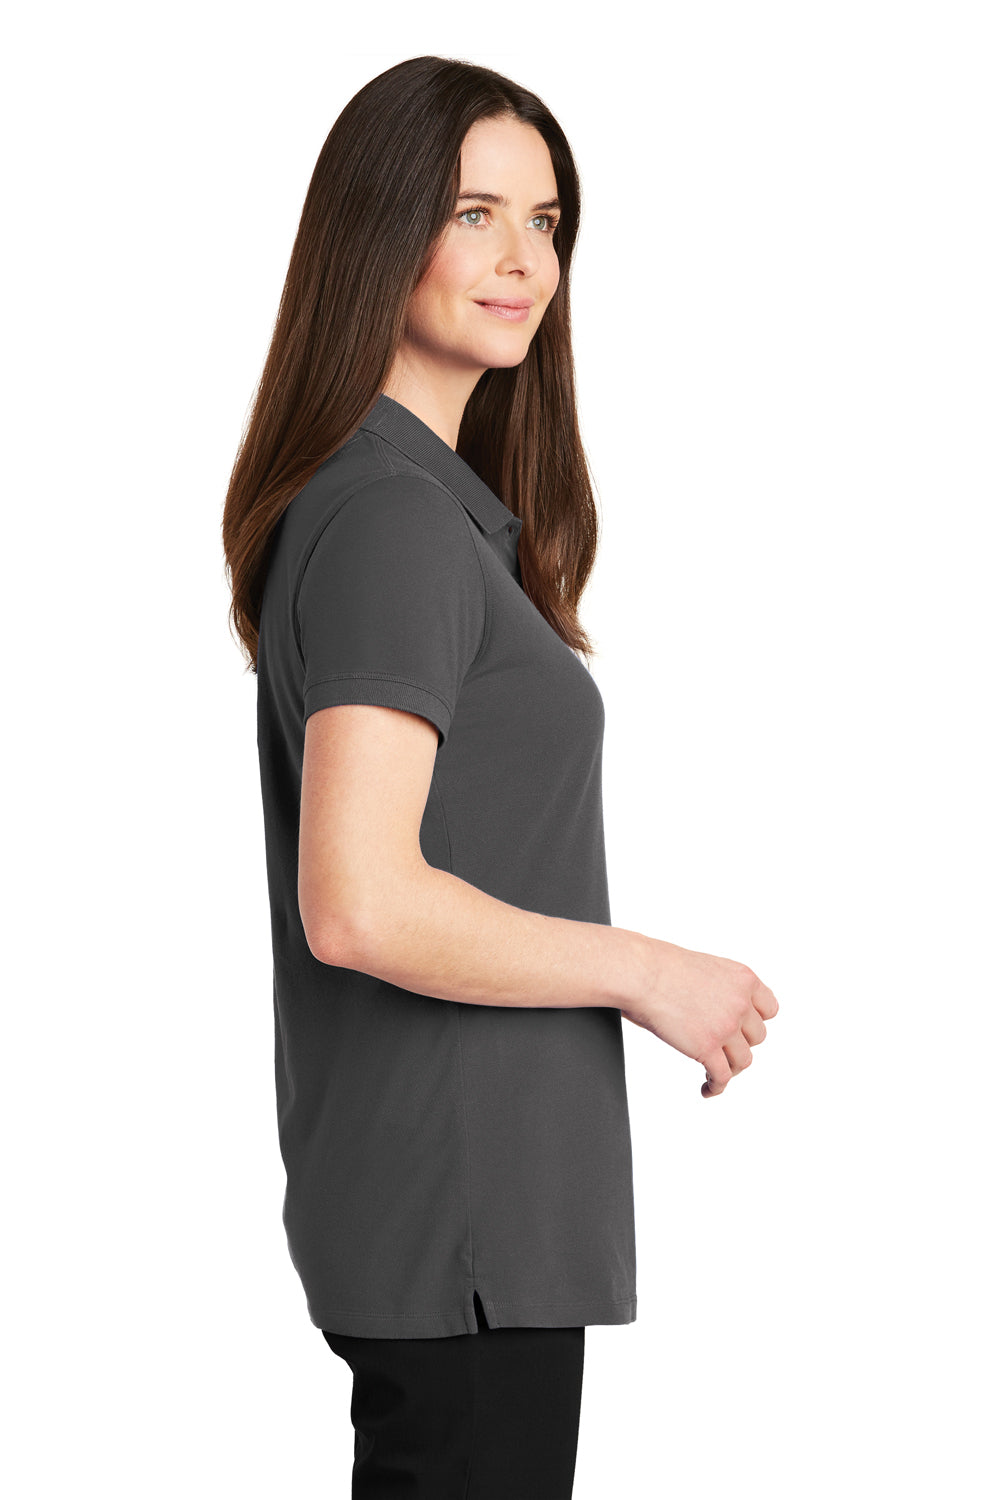 Port Authority LK8000 Womens Wrinkle Resistant Short Sleeve Polo Shirt Sterling Grey Side